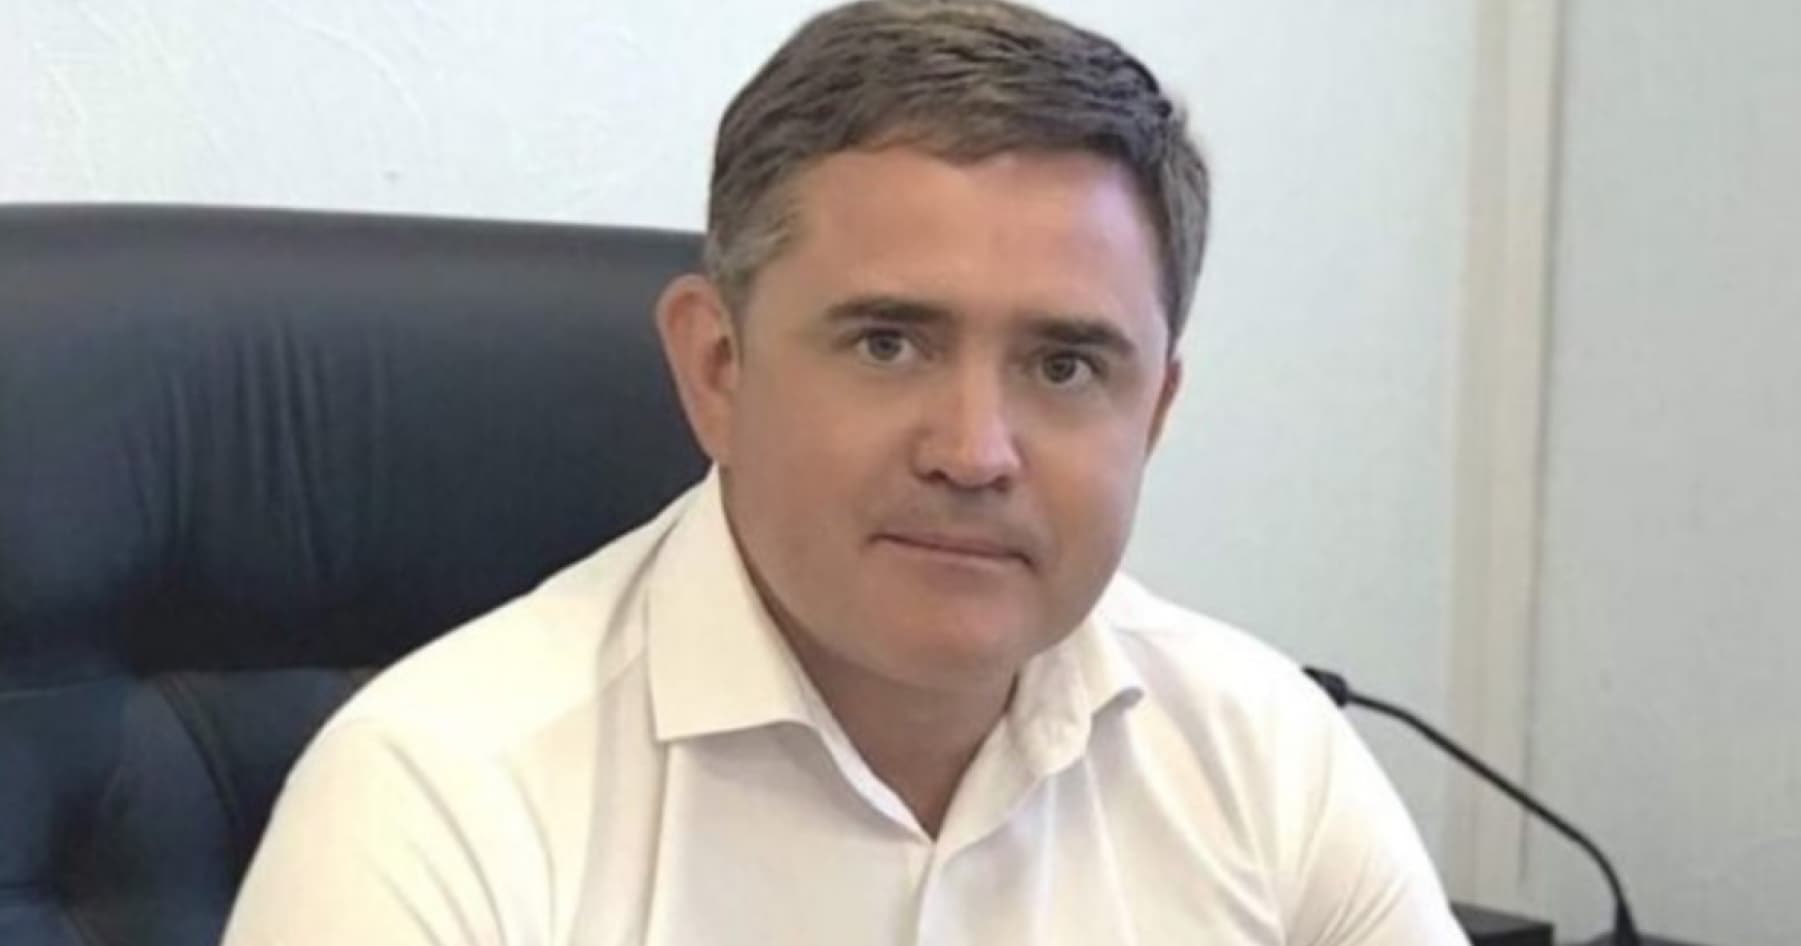 Russians detained Director General of Zaporizhzhia NPP Ihor Murashov and took him to an unknown destination